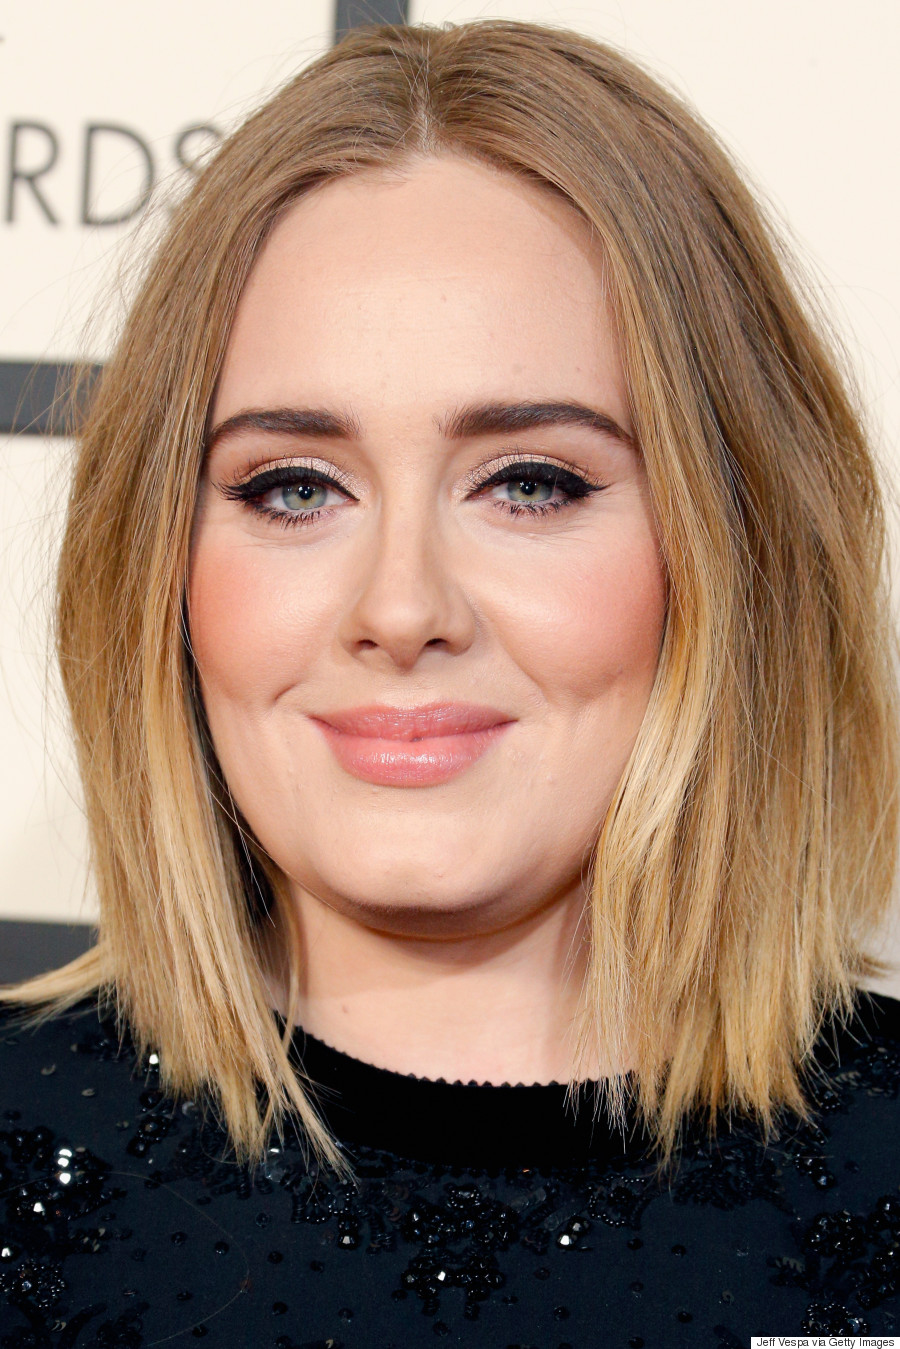 Adele Grammys 2016 Songstress Shines In Sequined Givenchy On Red